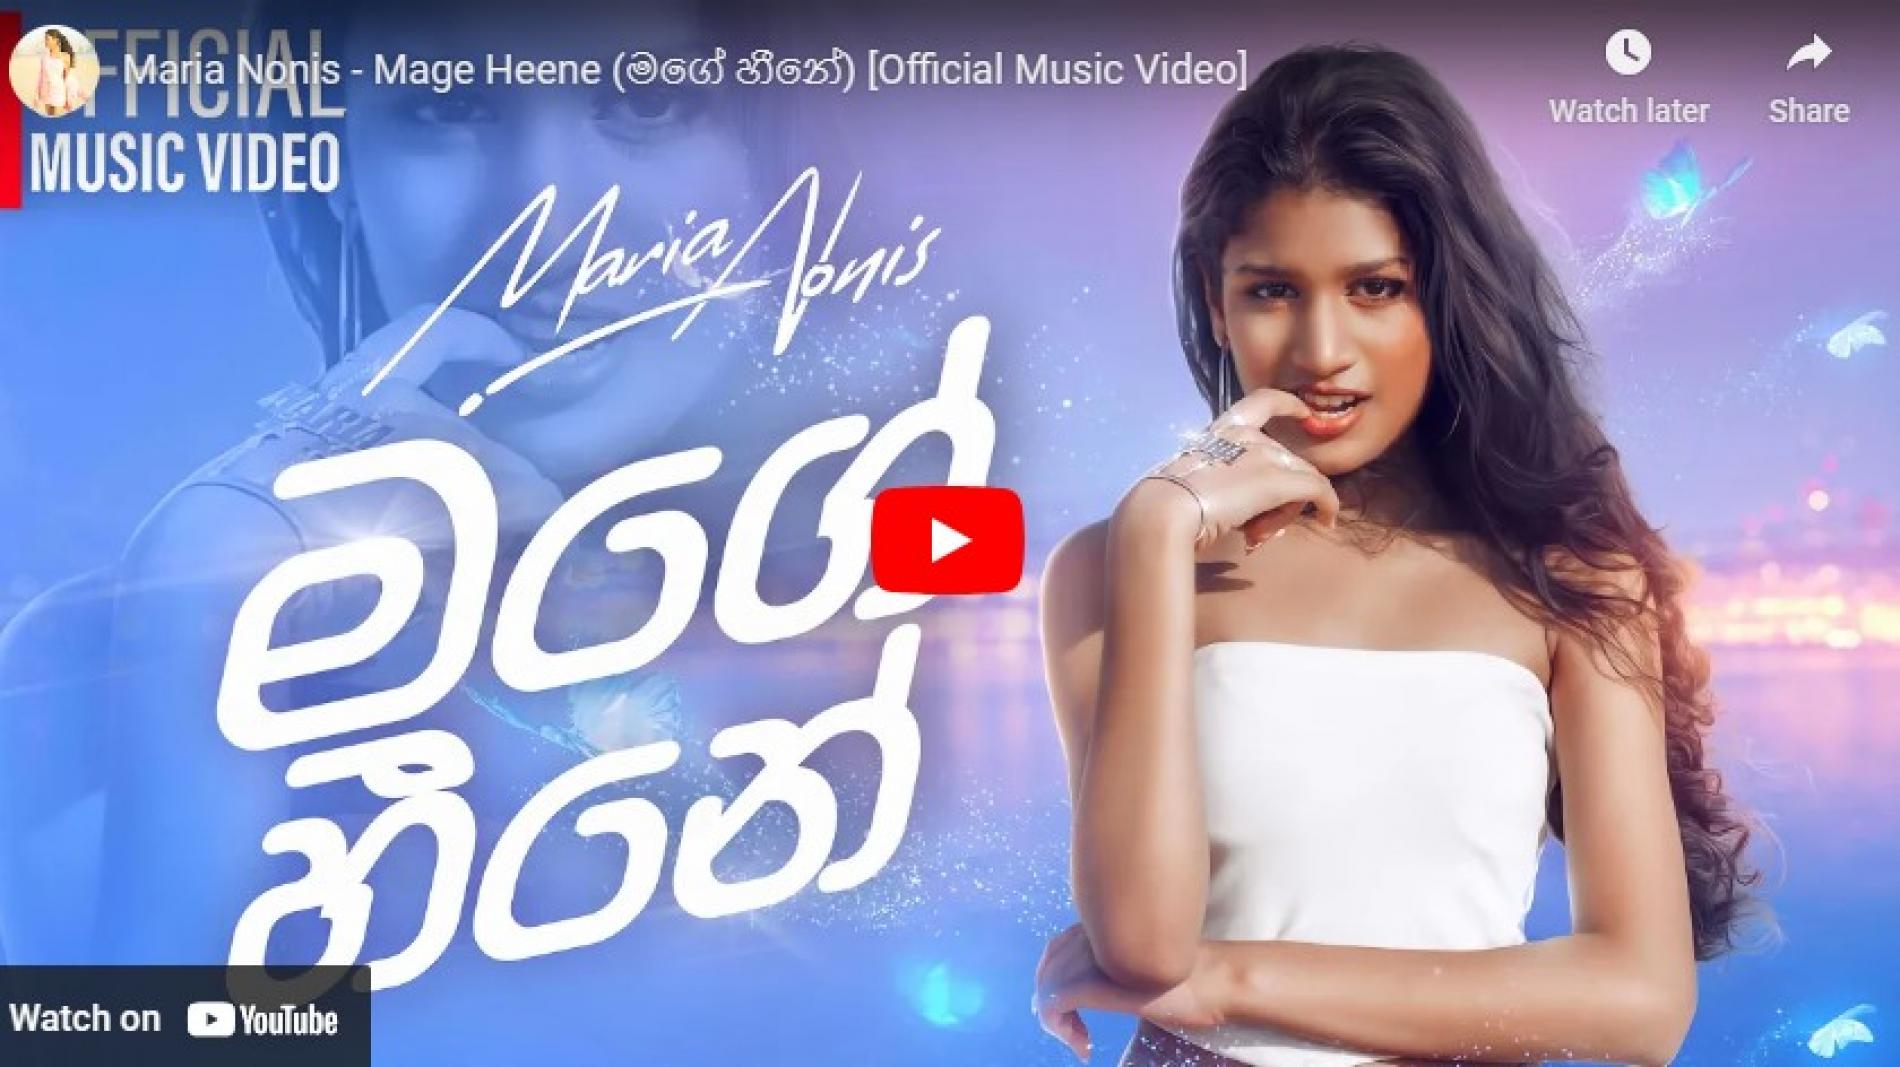 New Music : Maria Nonis – Mage Heene (මගේ හීනේ) [Official Music Video]